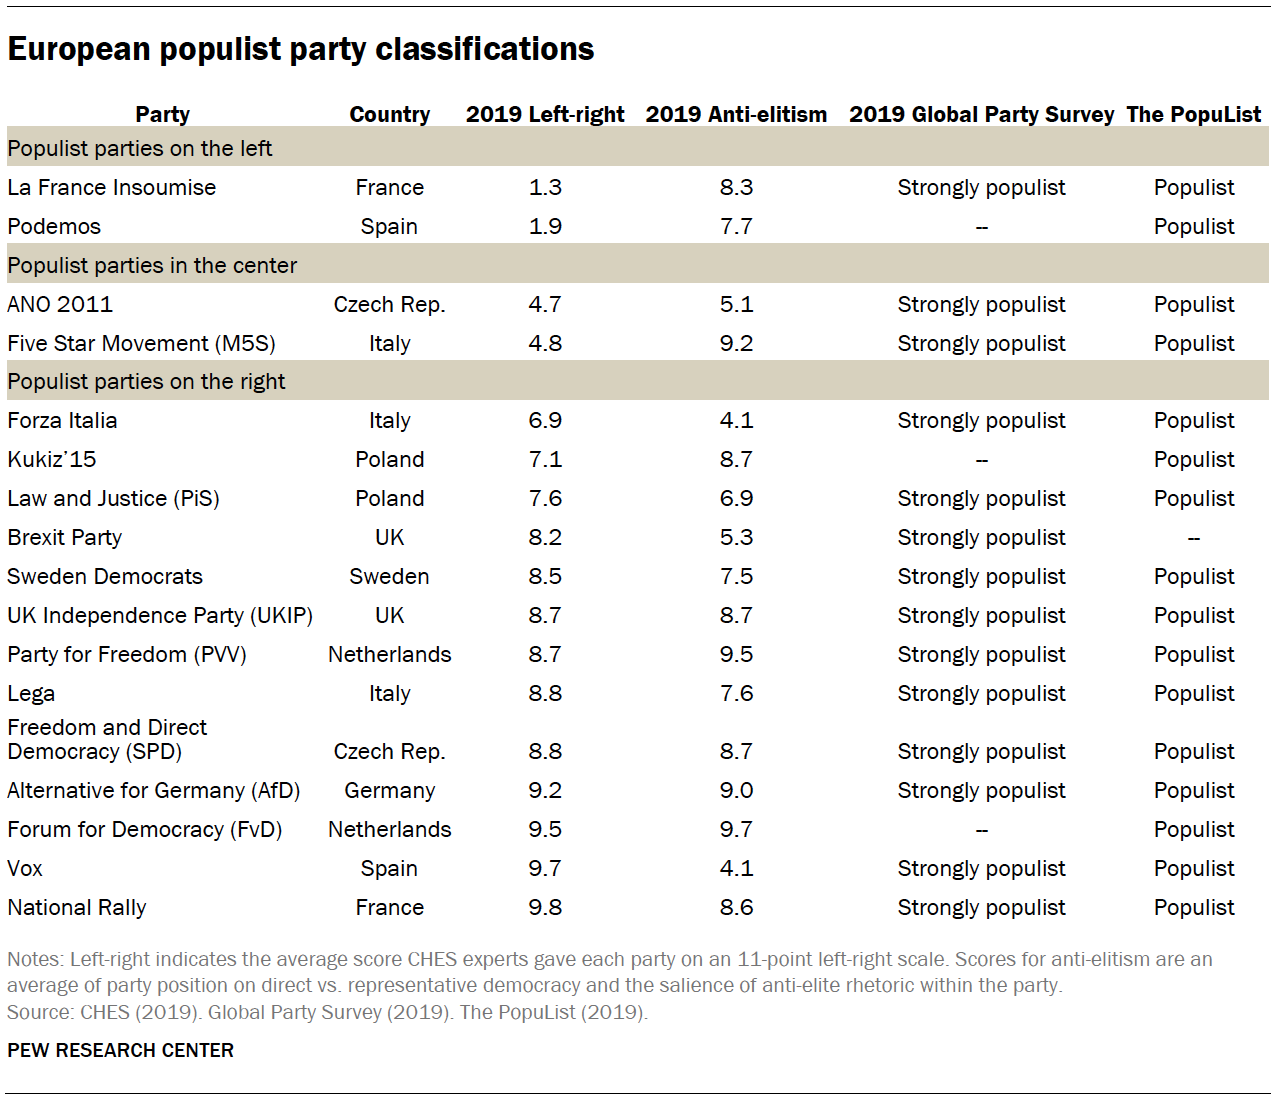 Chart shows European populist party classifications